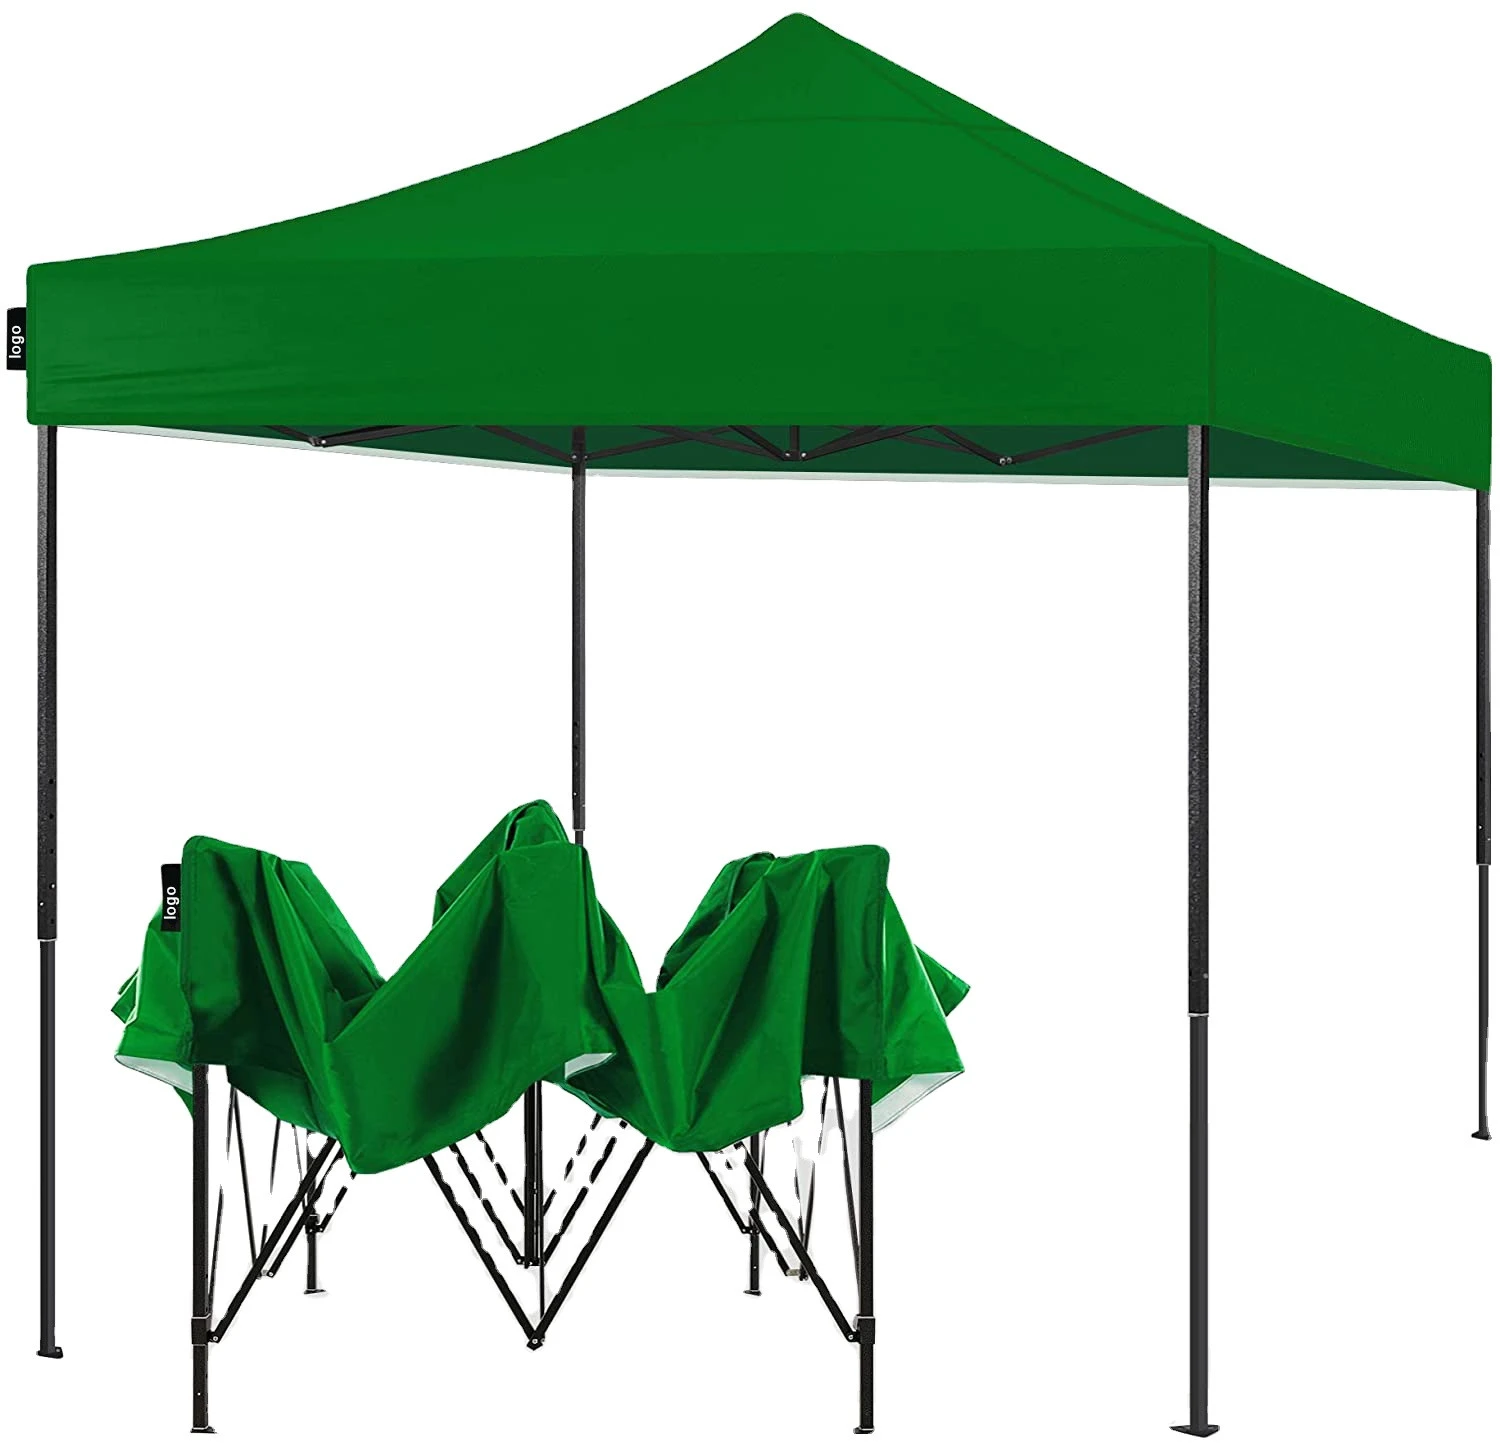 10 x 10 Foot Canopy Pop-Up Tents Exhibitions, Customizable Advertising Pavilions Trade Show Tents With Logos//